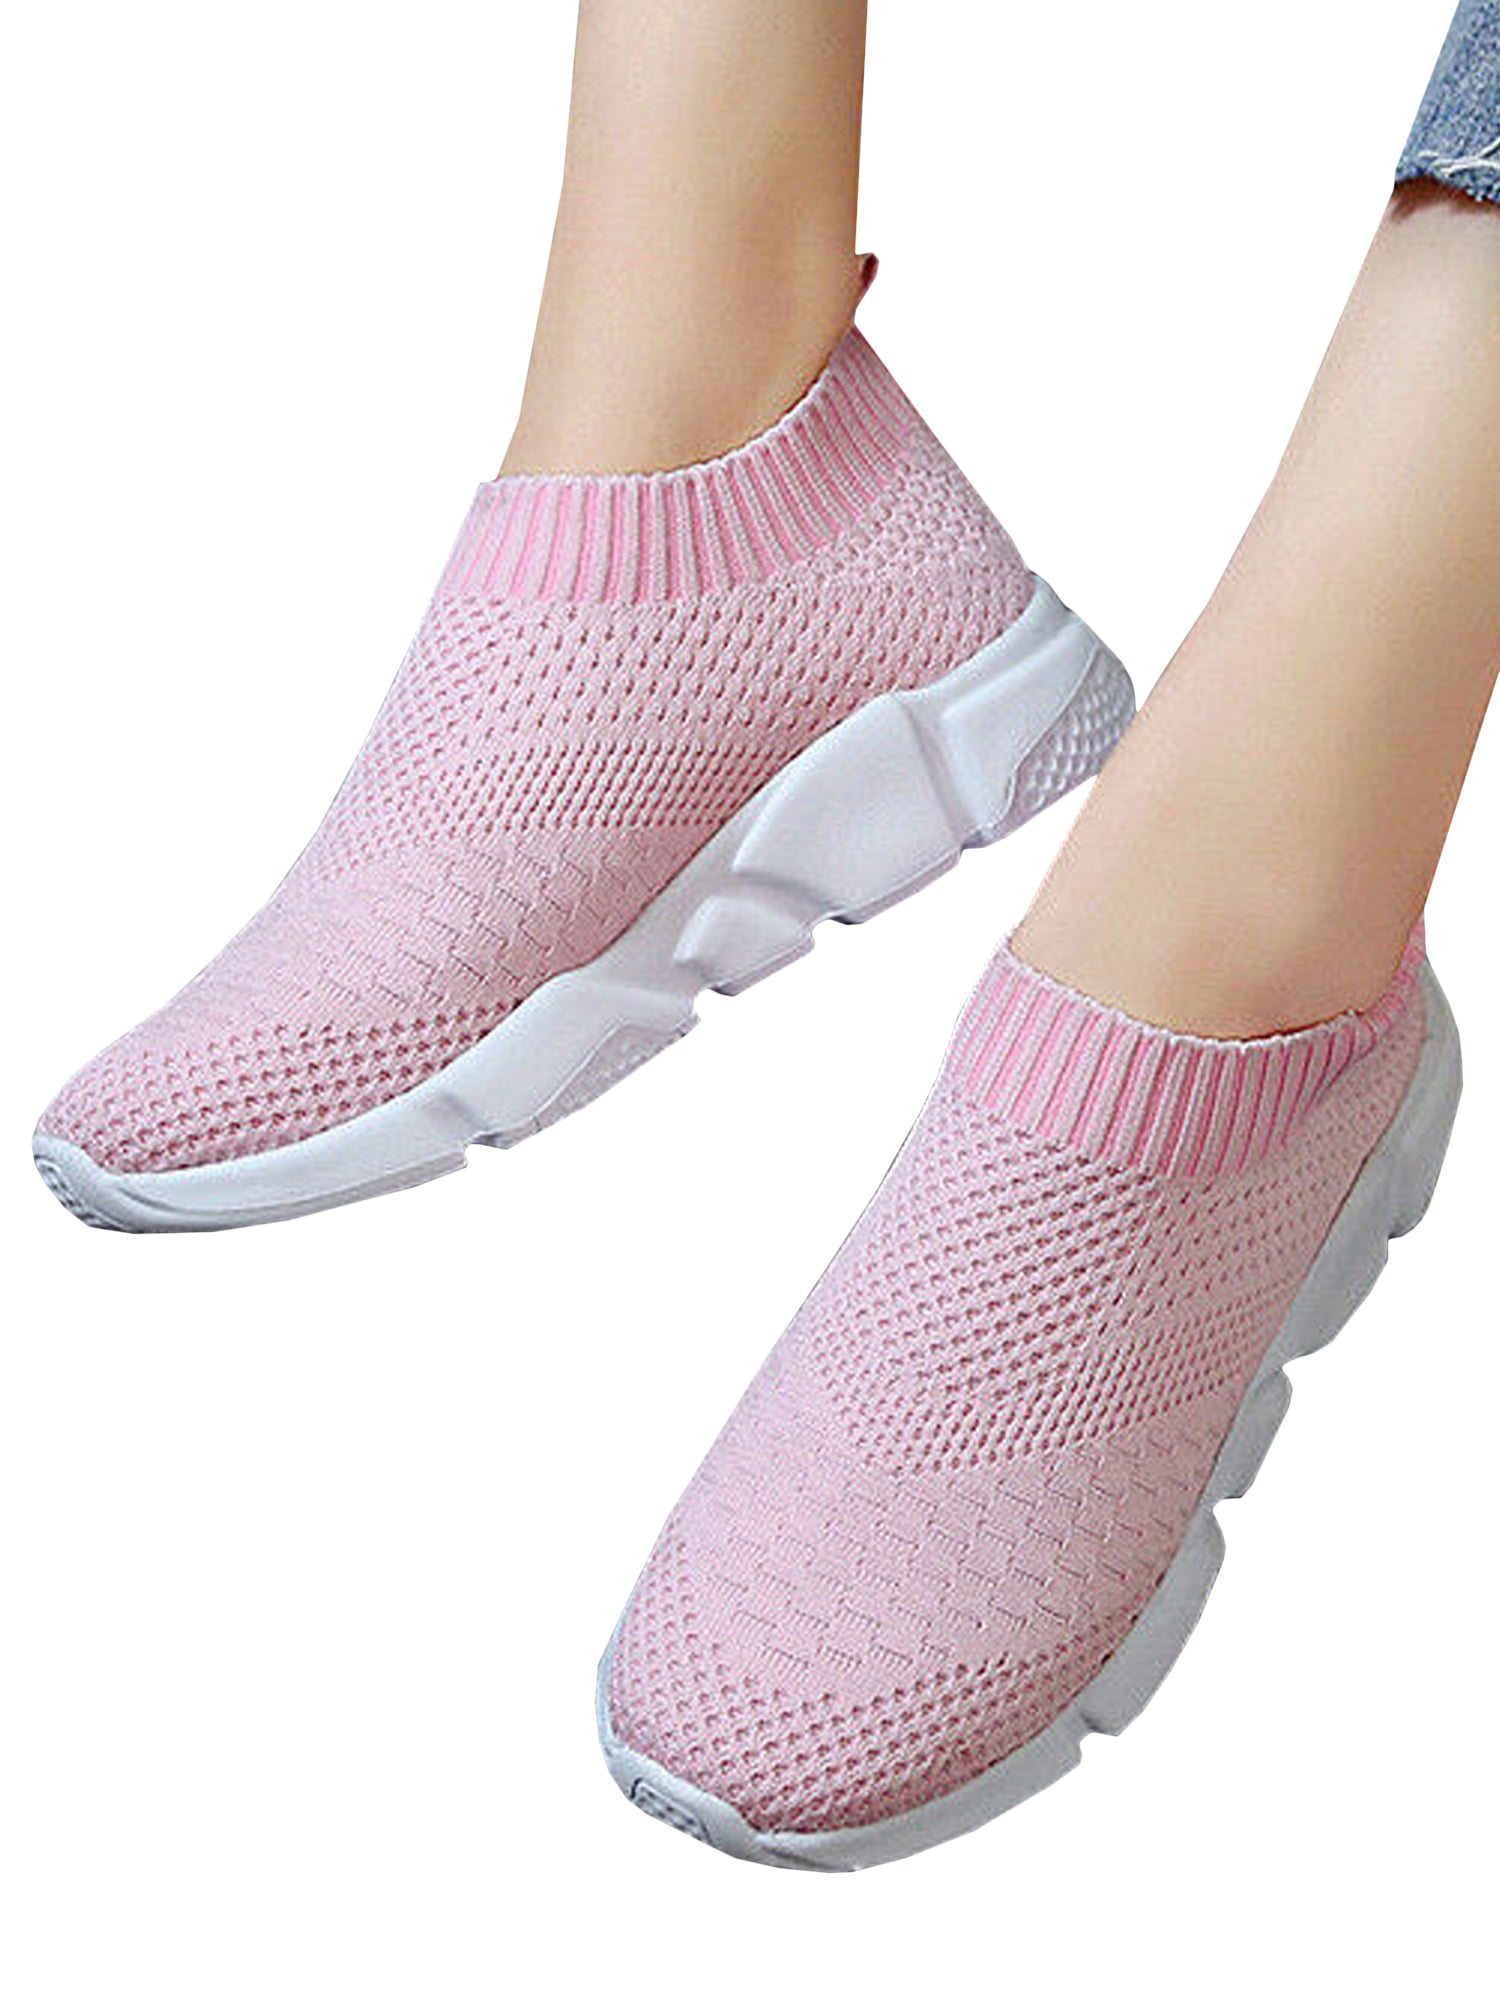 WOMENS SOCK KNIT TRAINERS LADIES LIGHTWEIGHT SPORTS COMFY SHOES RUNNING SNEAKERS 